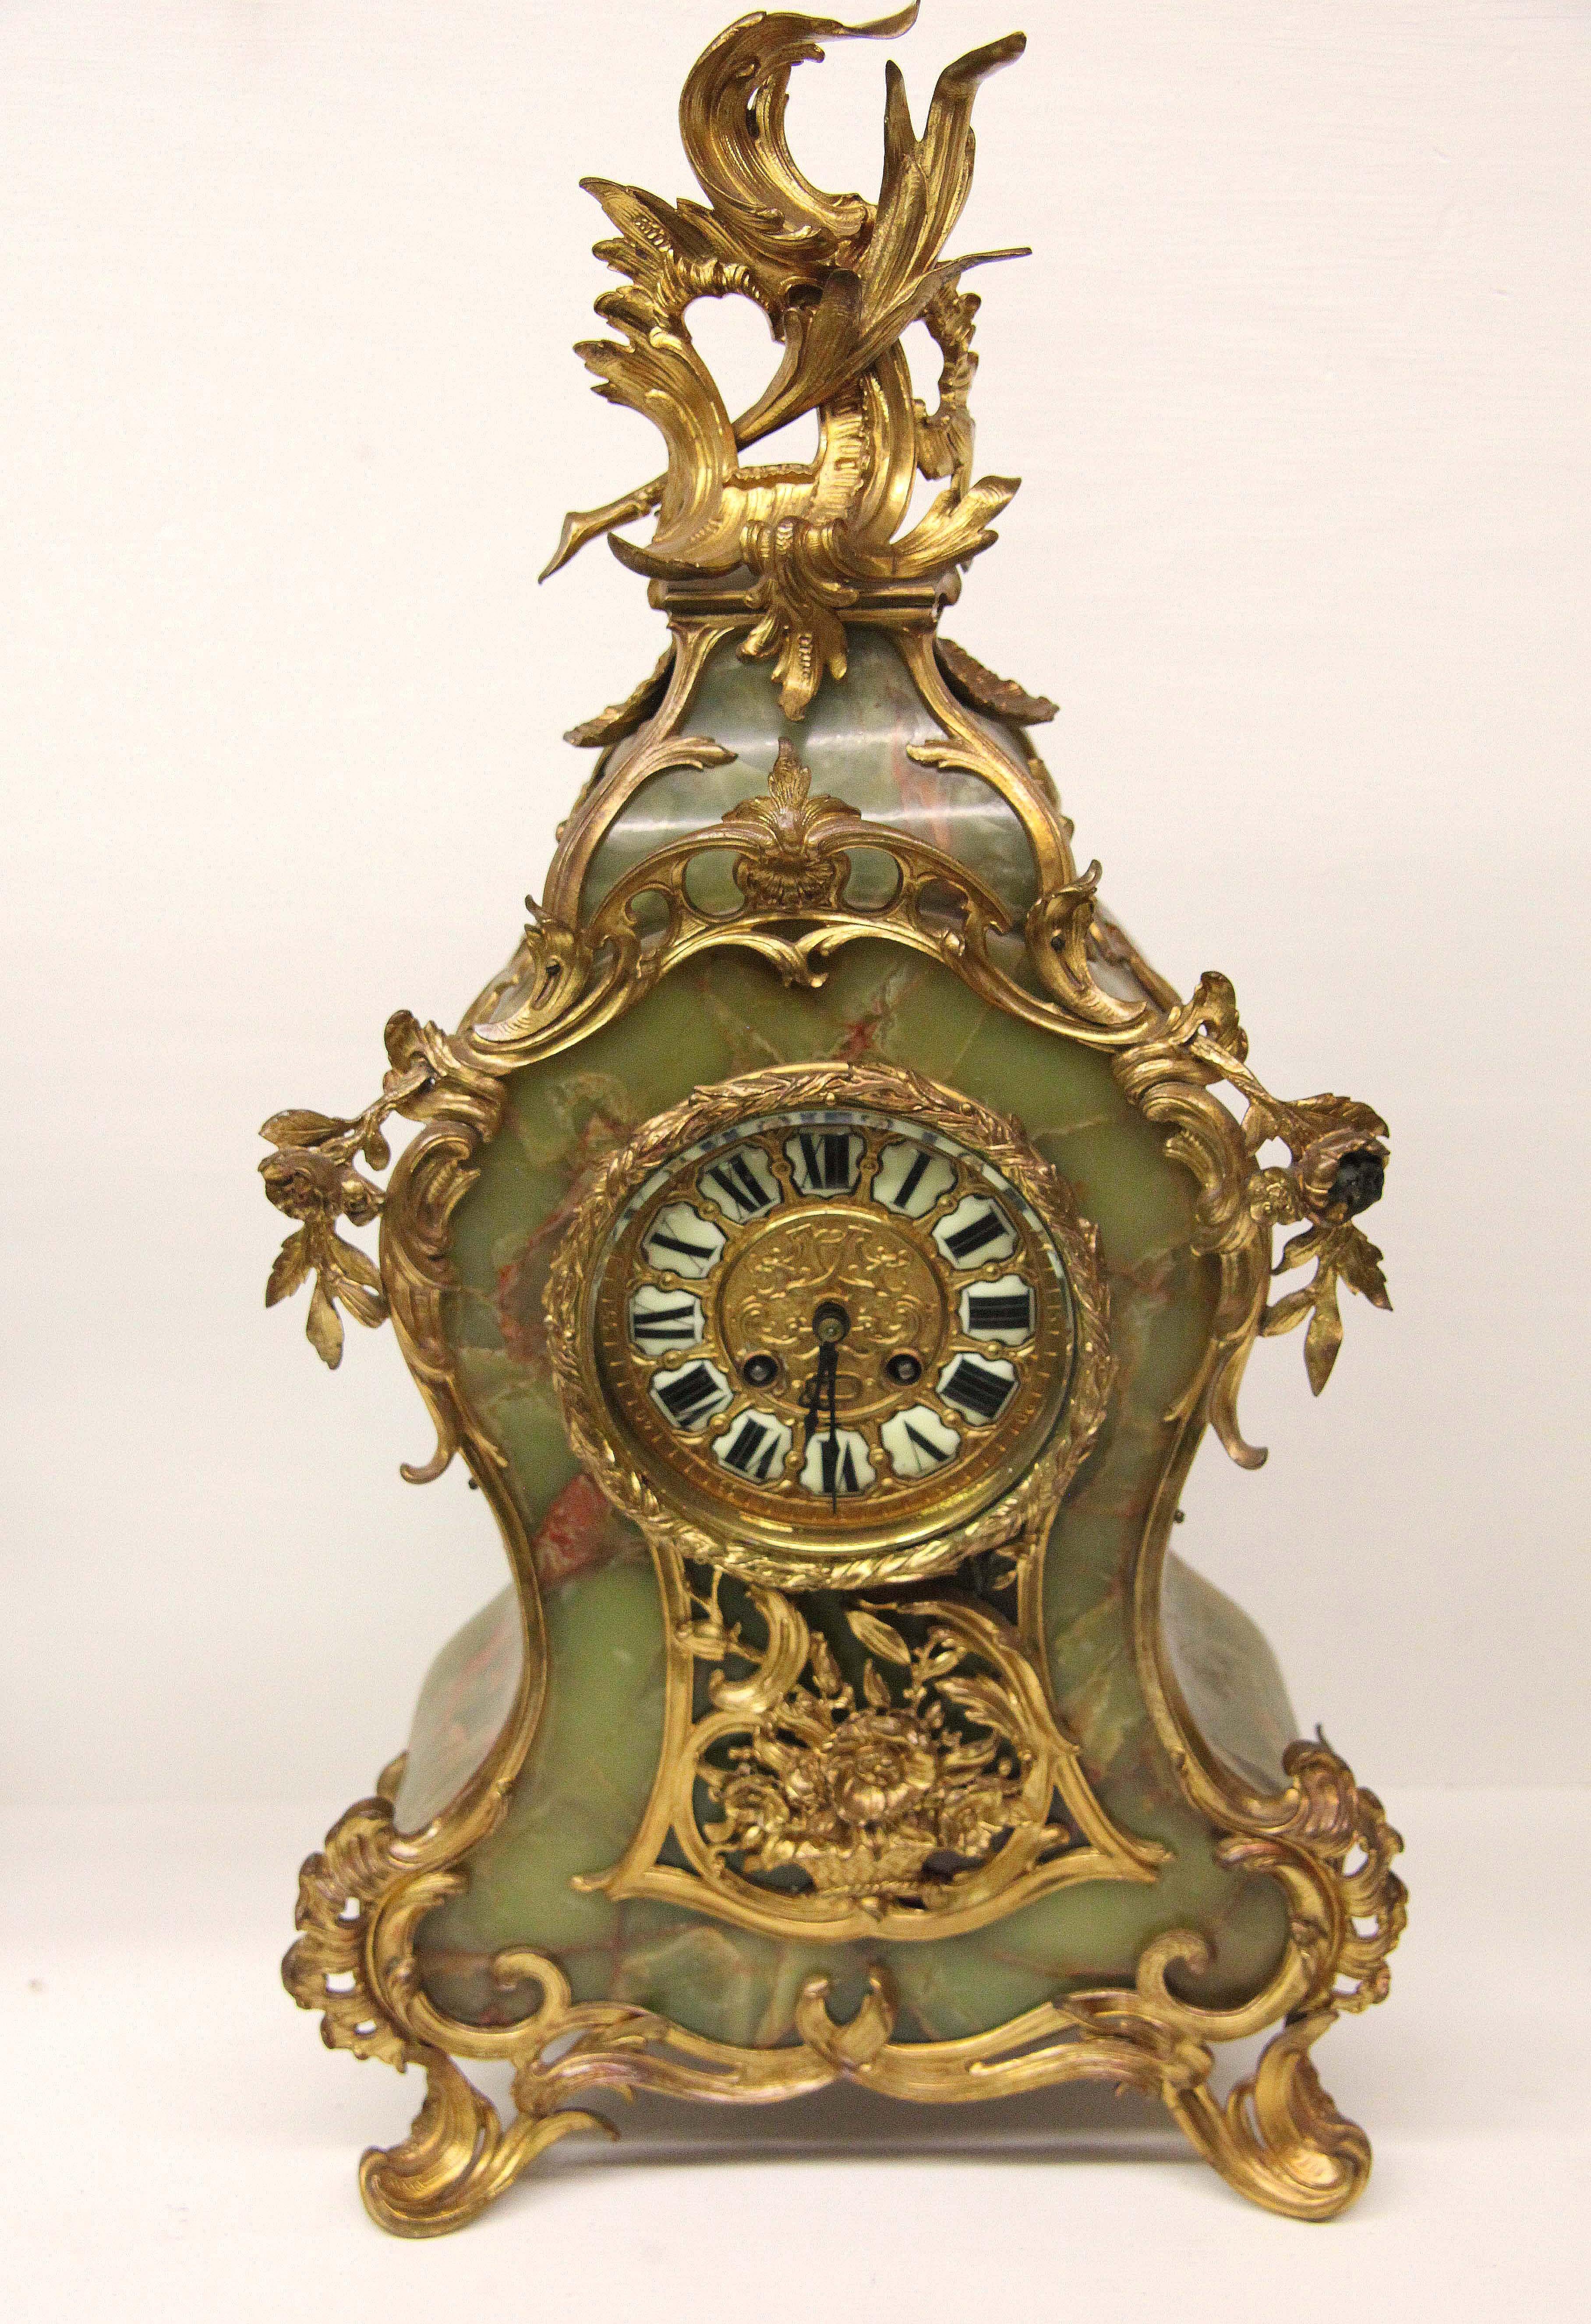 French onyx serpentine clock set, with serpentine shaped sides, the front decorated with ormolu featuring floral and foliate. The dial with porcelain Roman numerals inside beveled glass bezel above elaborate floral and foliate ormolu. The matching